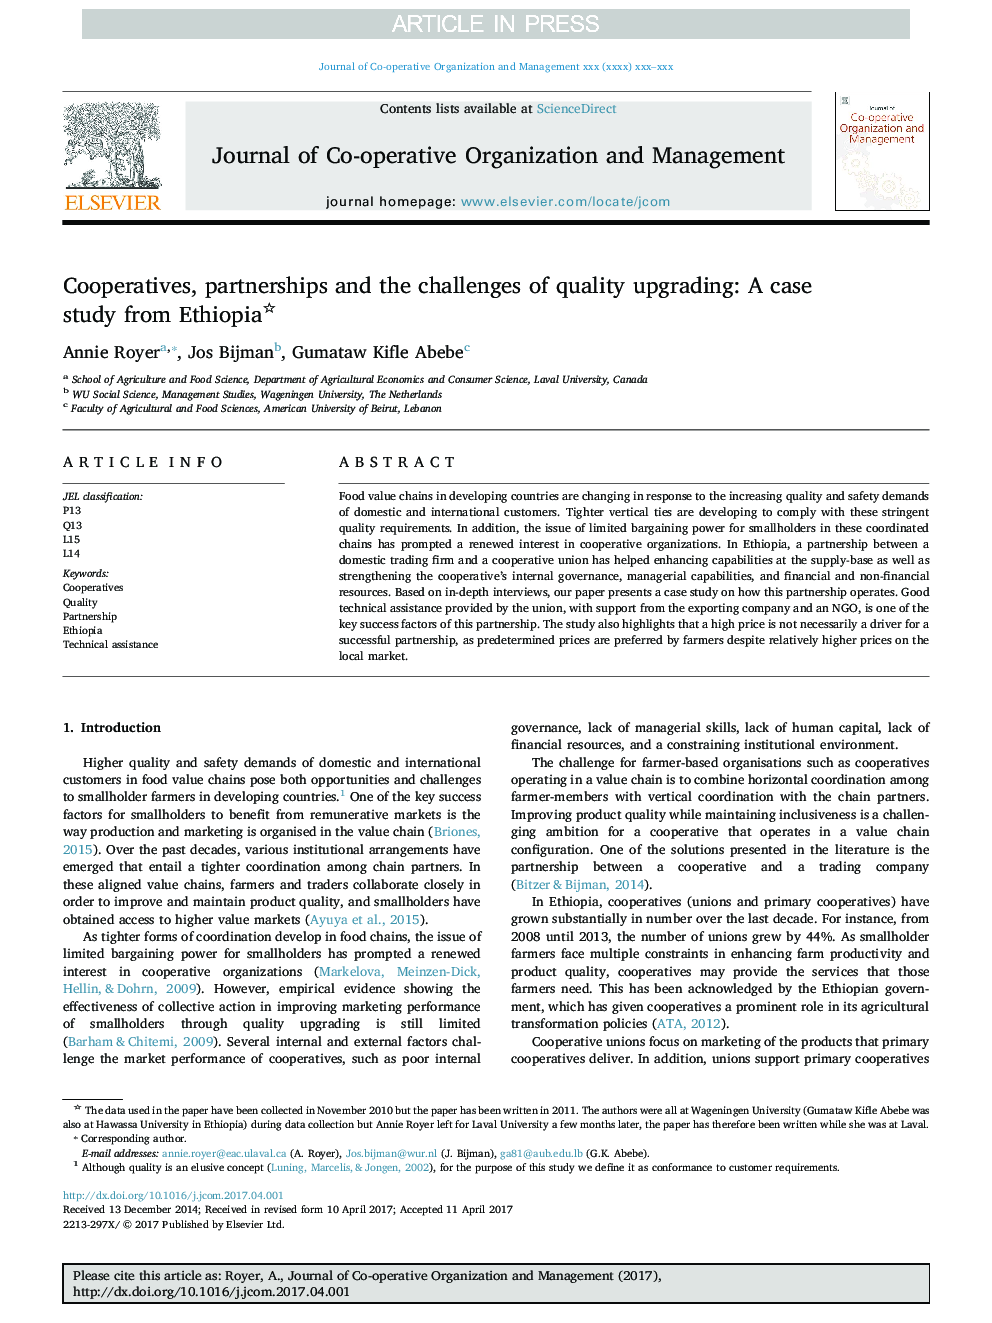 Cooperatives, partnerships and the challenges of quality upgrading: A case study from Ethiopia